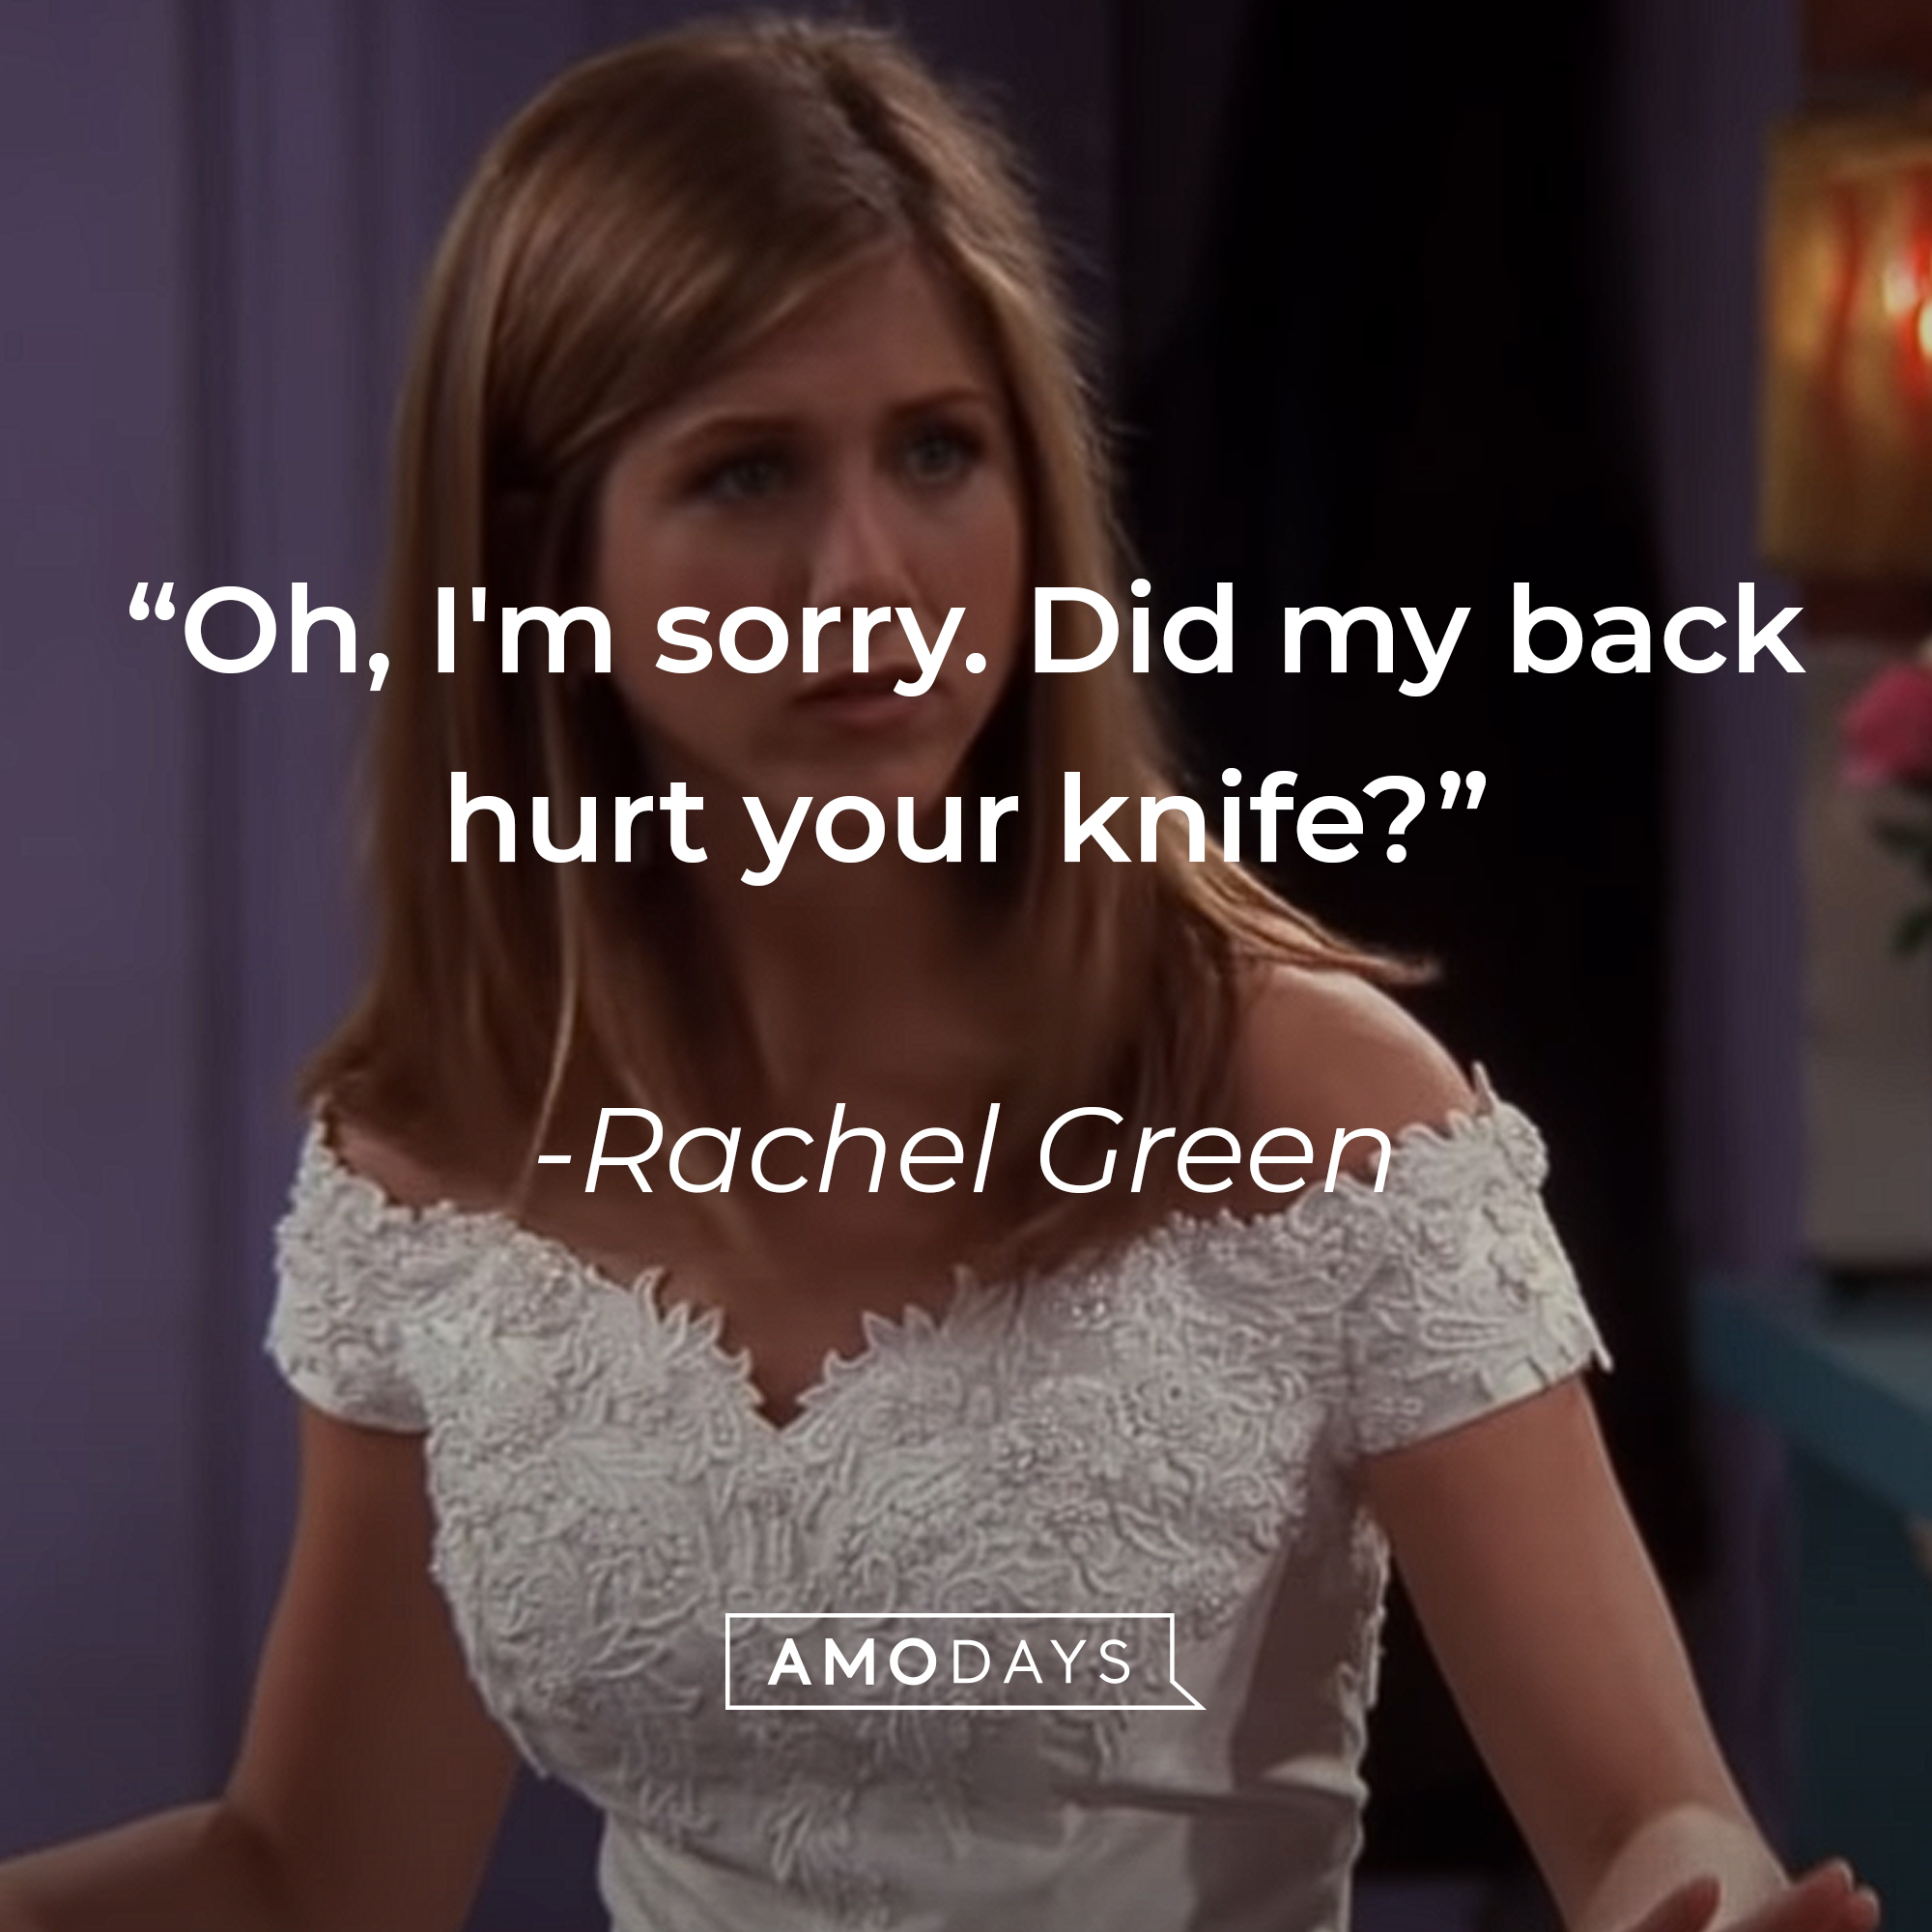 Rachel Green's quote: "Oh, I'm sorry. Did my back hurt your knife?" | Source: youtube.com/warnerbrostv